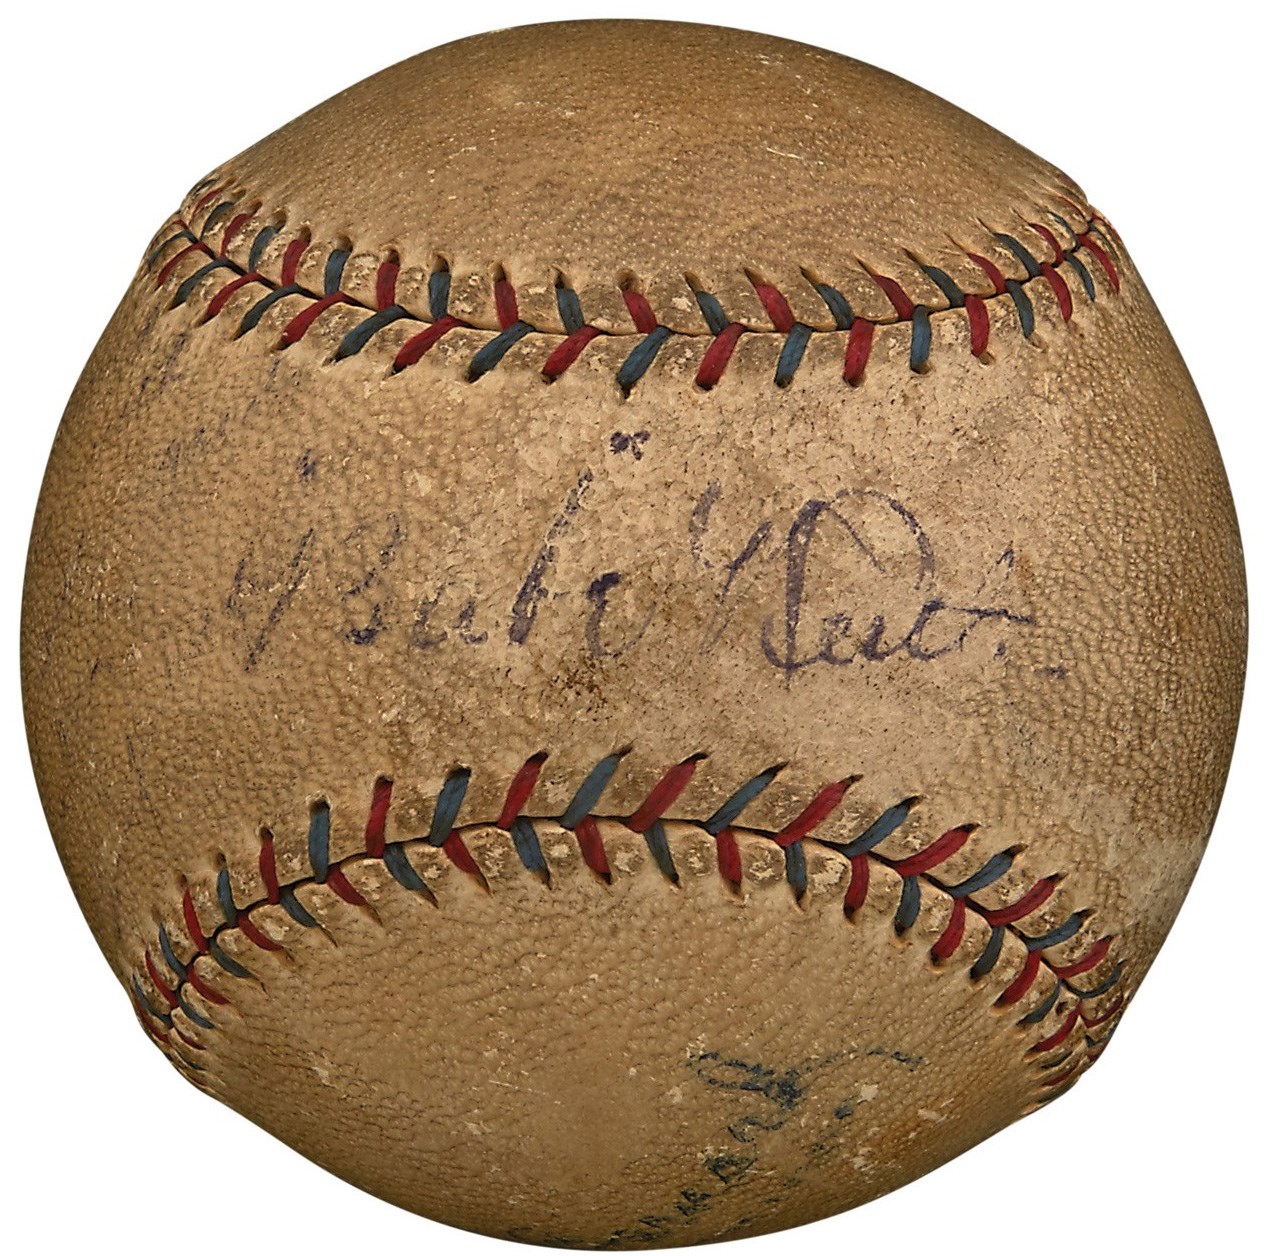 - 1928 Babe Ruth and Lou Gehrig Dual-Signed Reach Baseball (PSA)